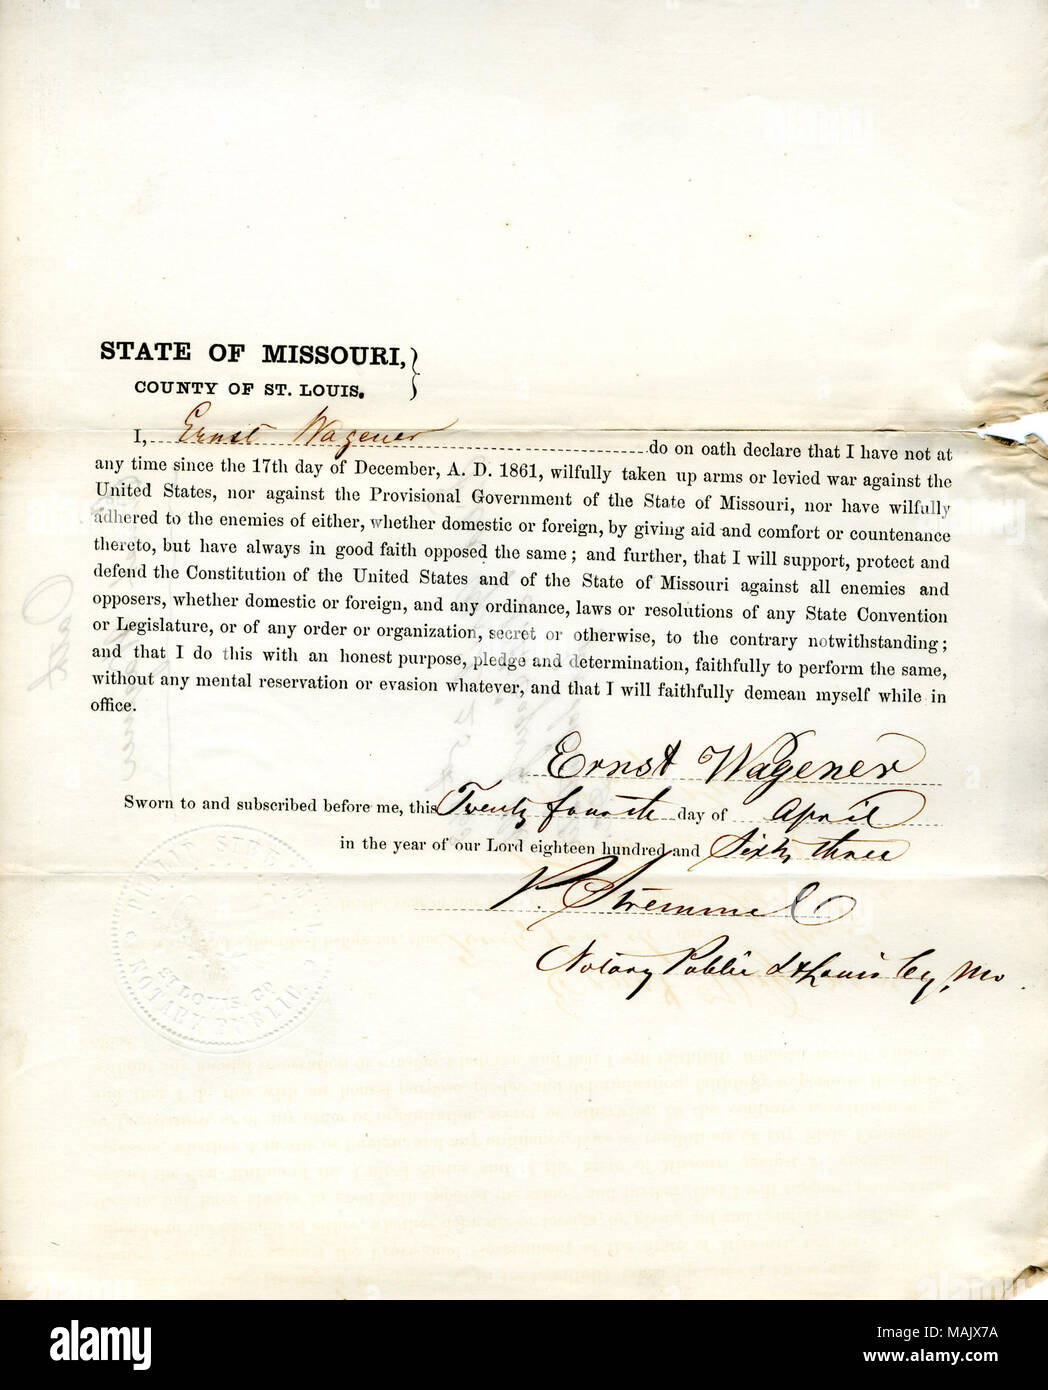 Swears oath of allegiance to the Government of the United States and the State of Missouri. Title: Loyalty oath of Ernst Wagener of Missouri, County of St. Louis  . 25 April 1863. Wagener, Ernst Stock Photo